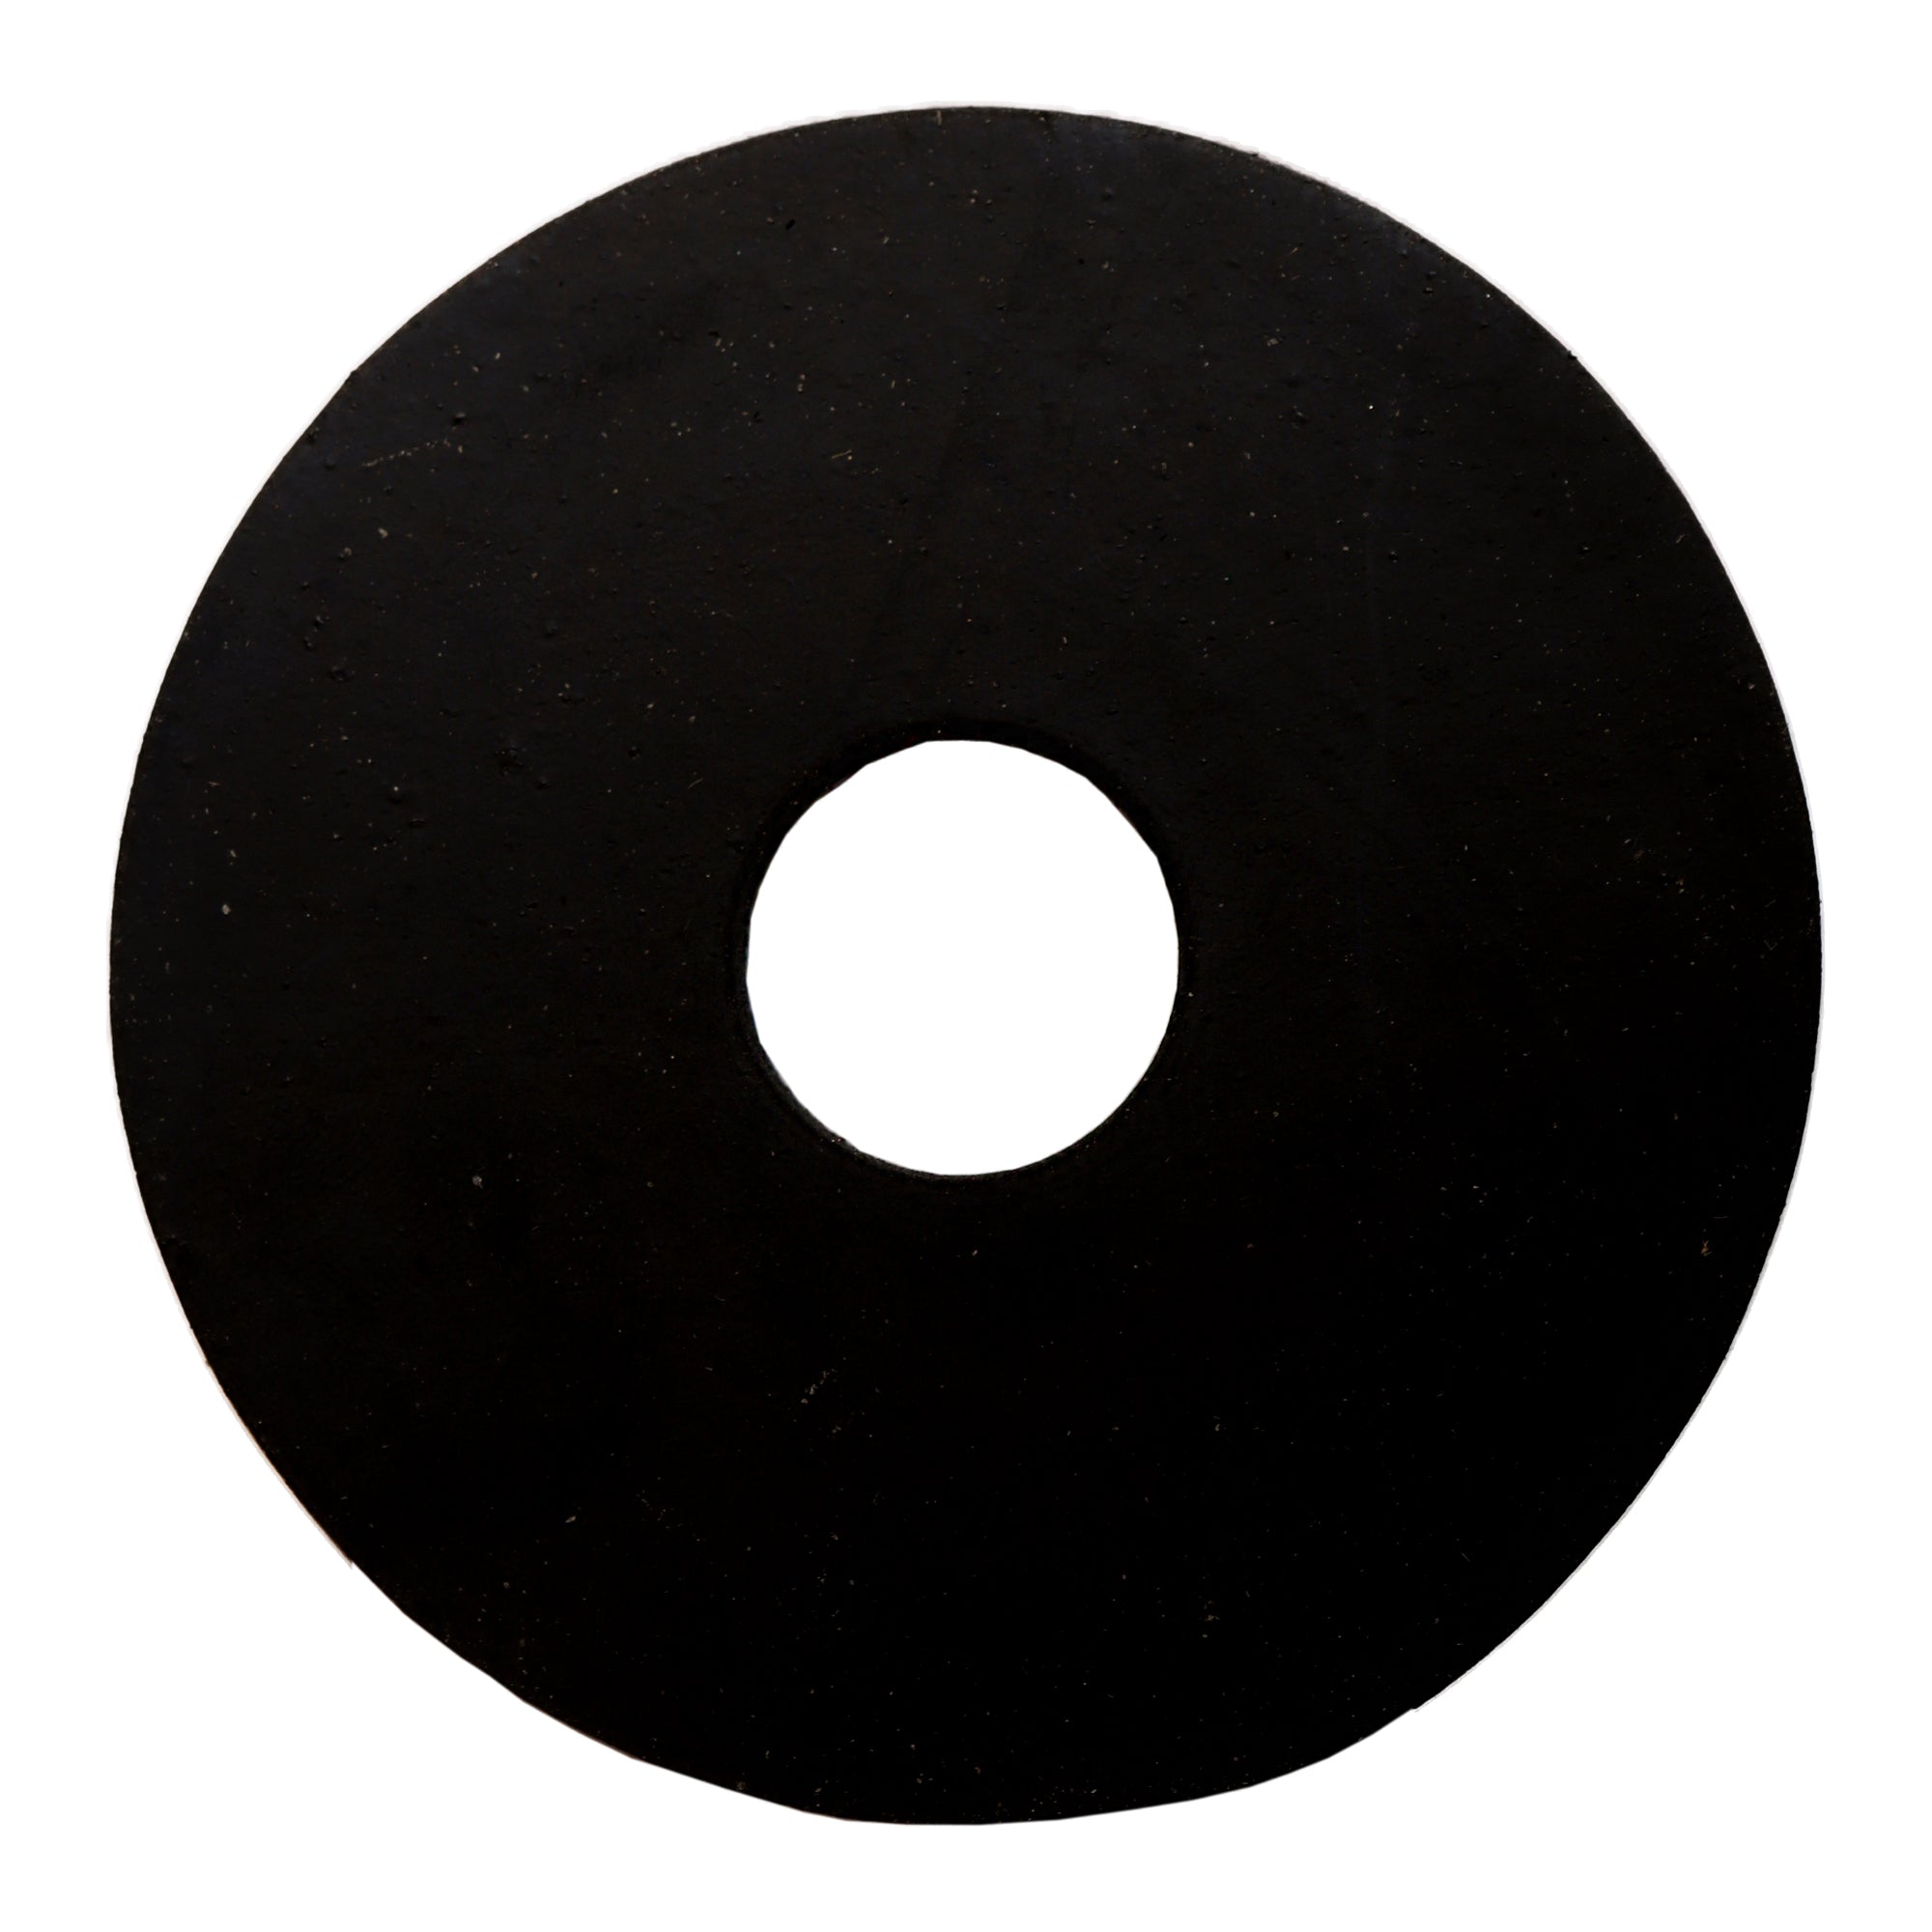 0711 Adapter Replacement Gasket for 1111 cap